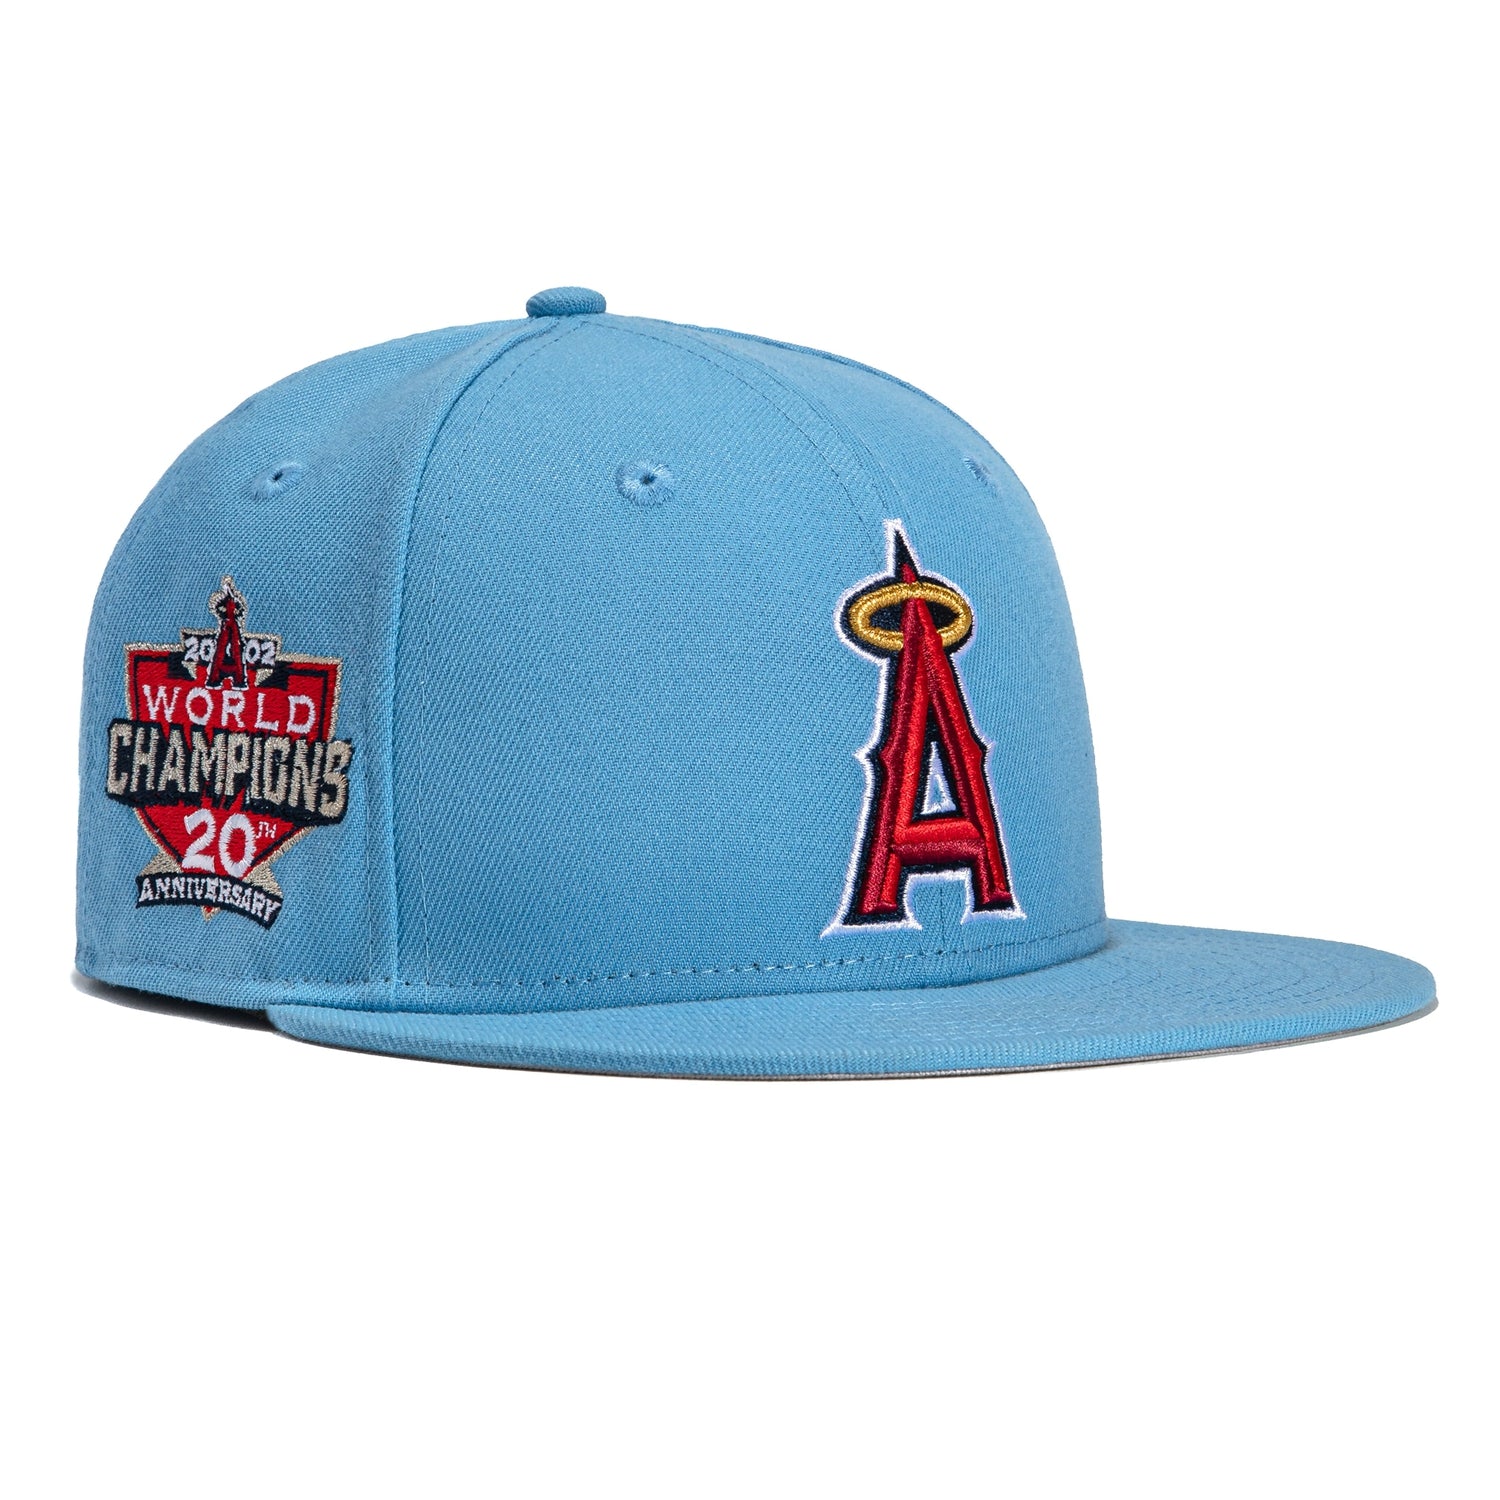 Los Angeles Angels New Era Jersey 59FIFTY Fitted Hat - Black